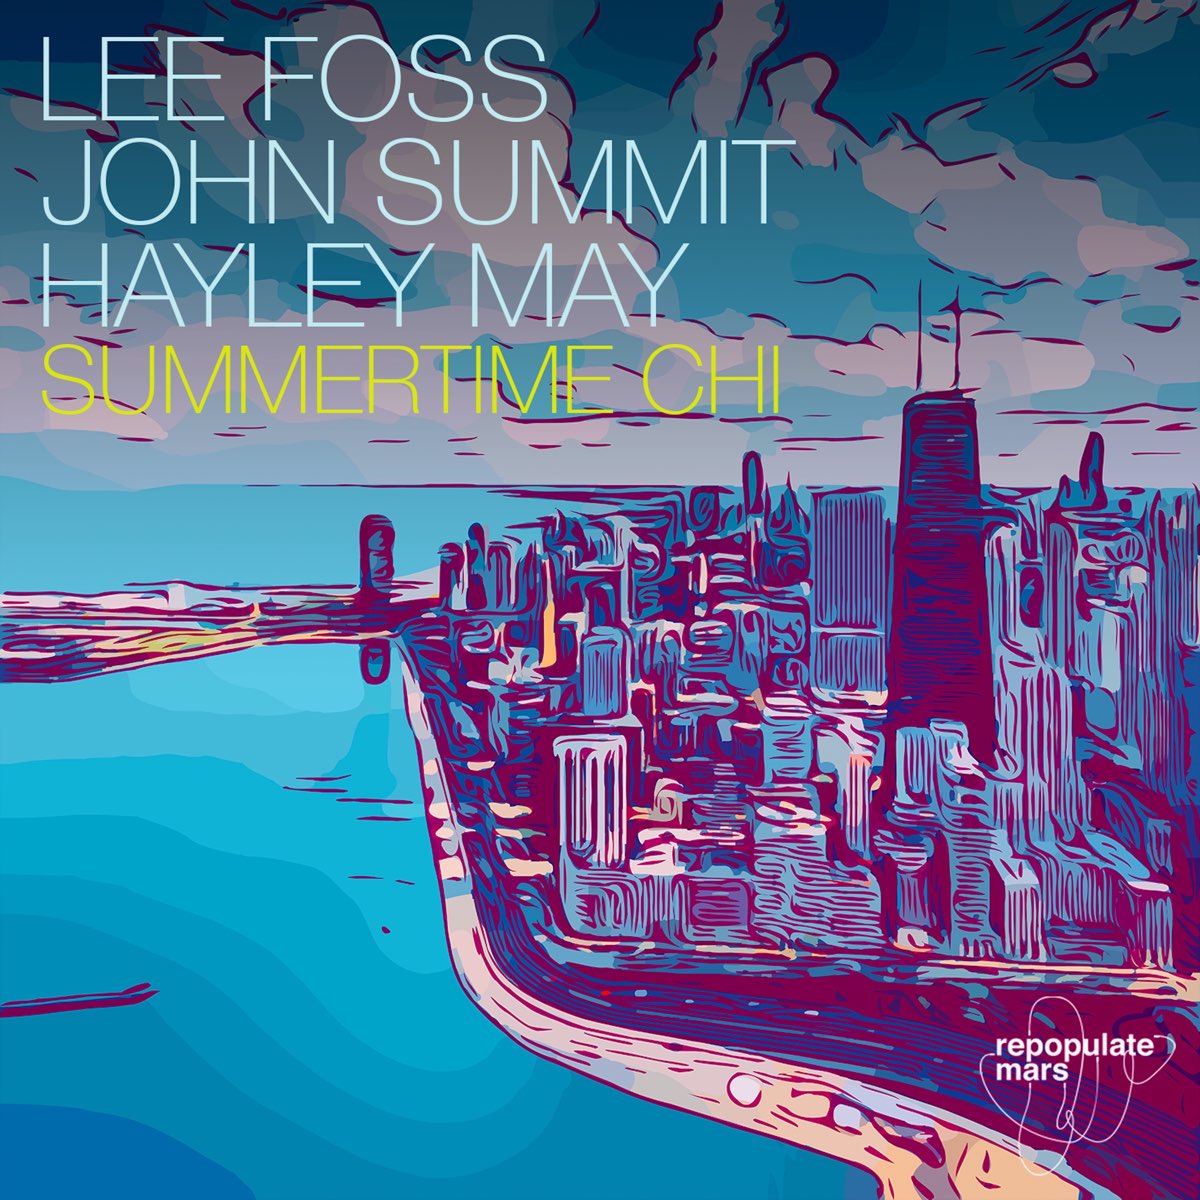 Lee Foss, John Summit, & Hayley May Summertime Chi cover artwork